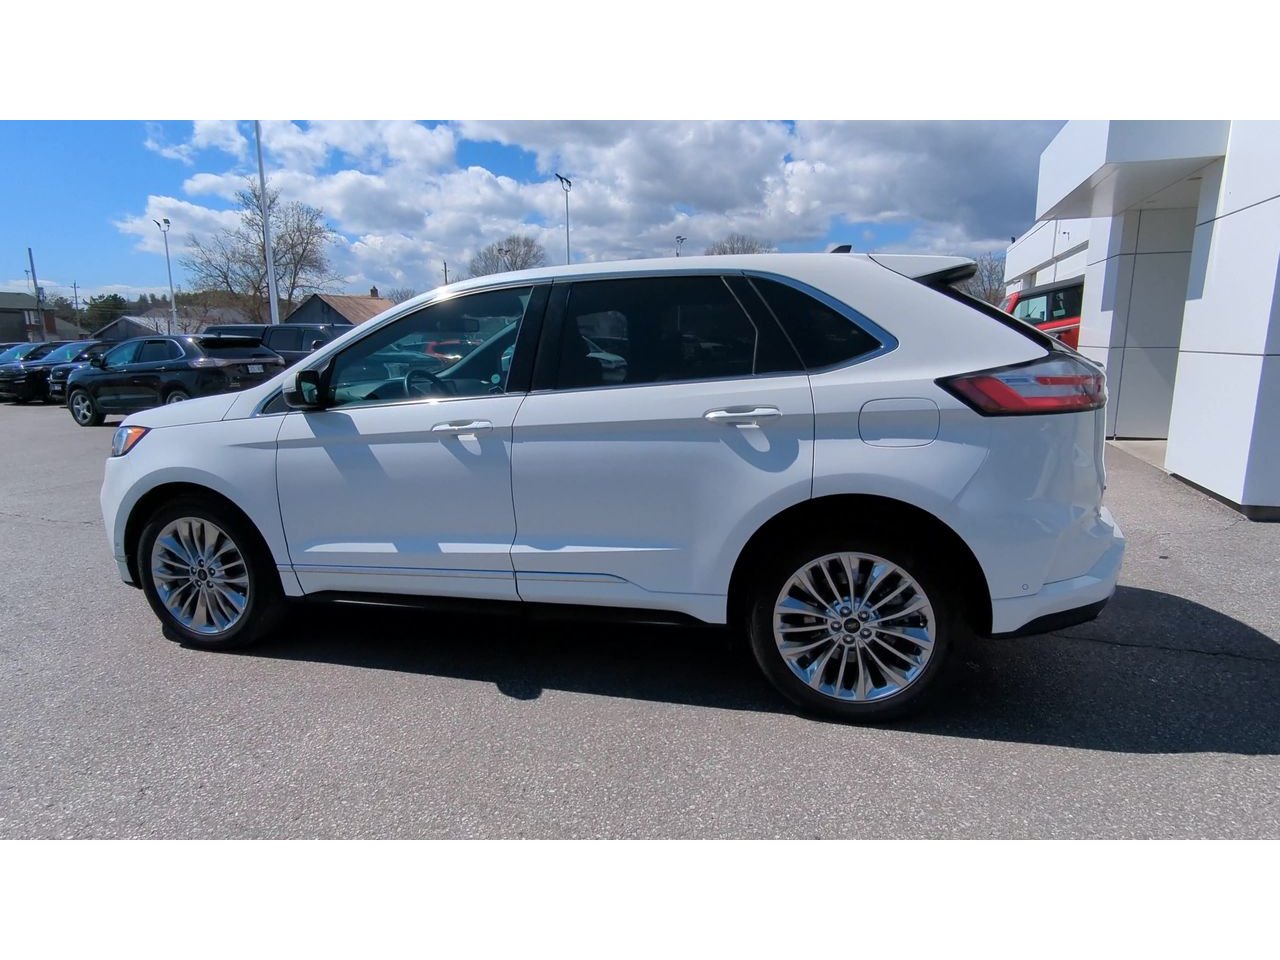 2022 Ford Edge - 21598A Full Image 6